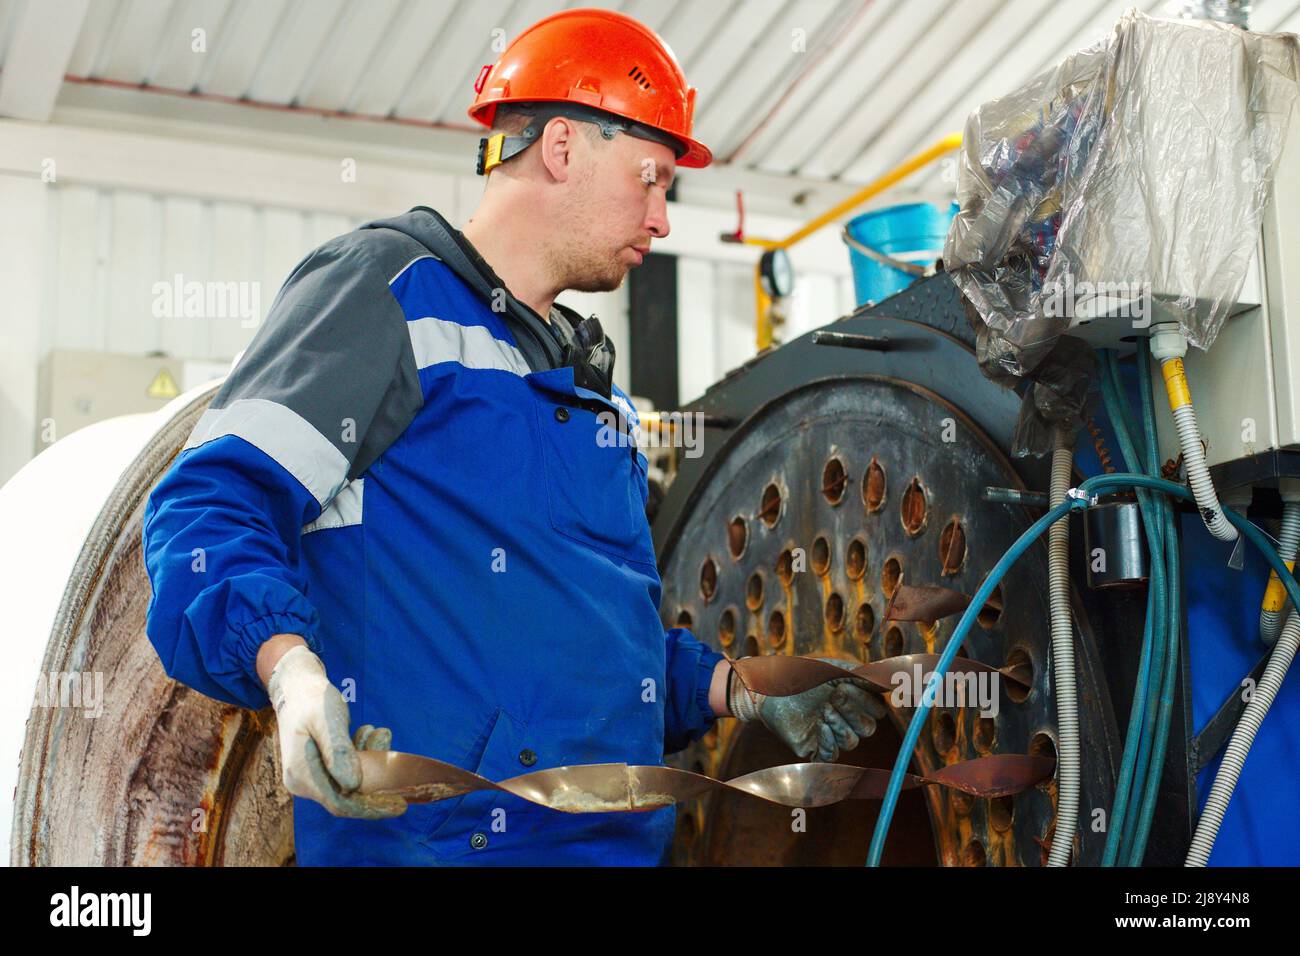 Engineer in helmet inspects and repairs gas equipment of boiler room. Cleaning and maintenance of industrial steam boiler. Stock Photo